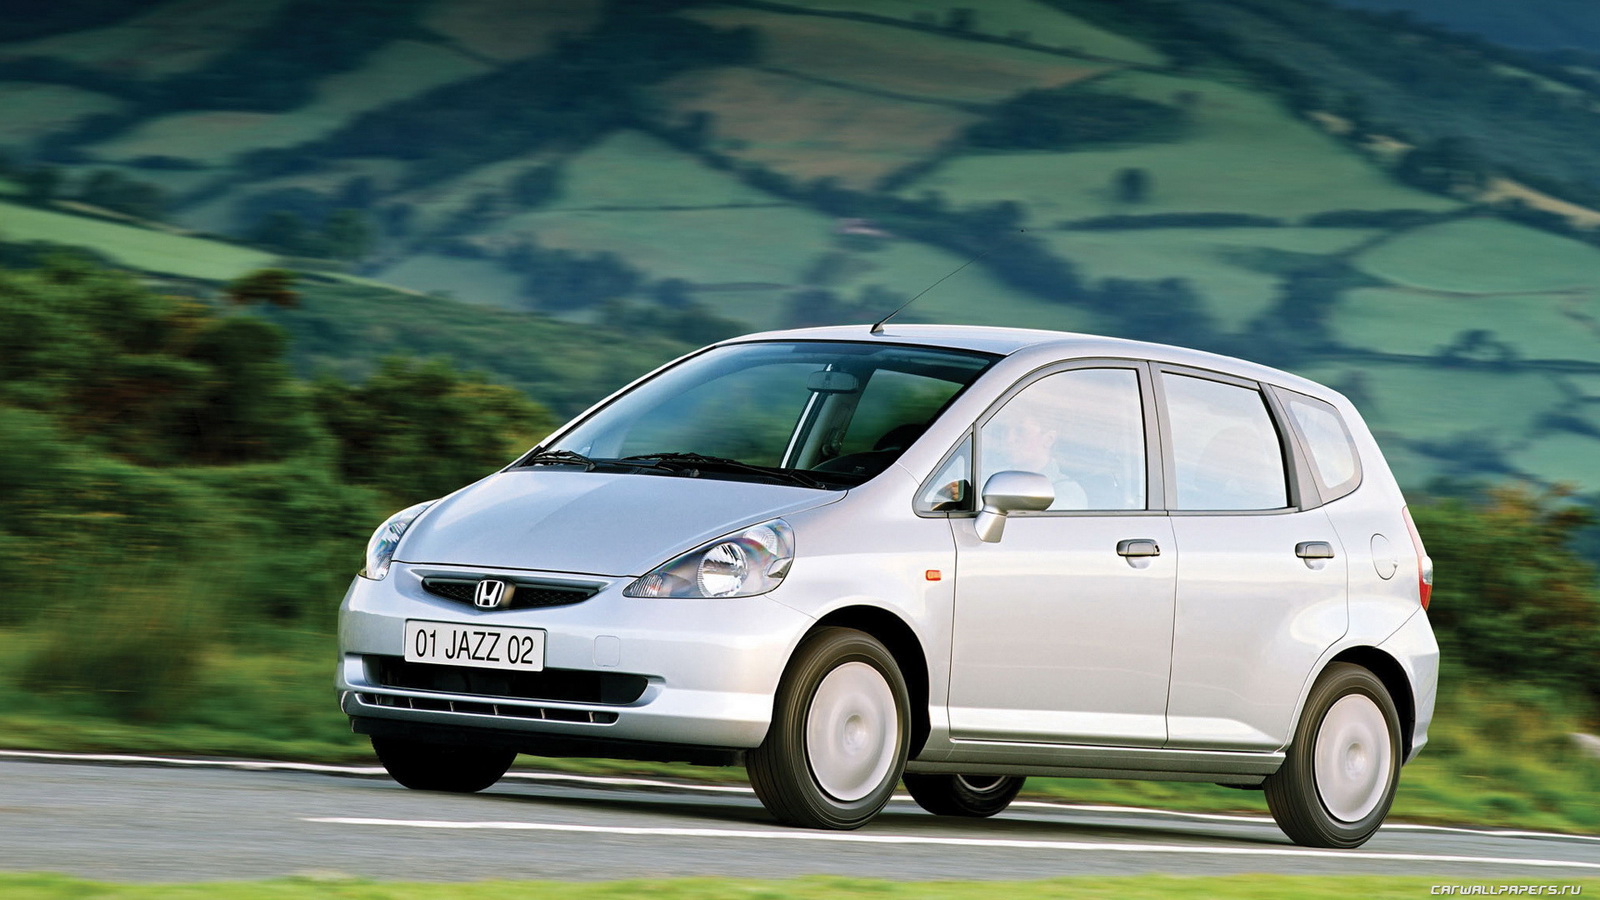 Honda Jazz 2001 Review, Amazing Pictures and Images